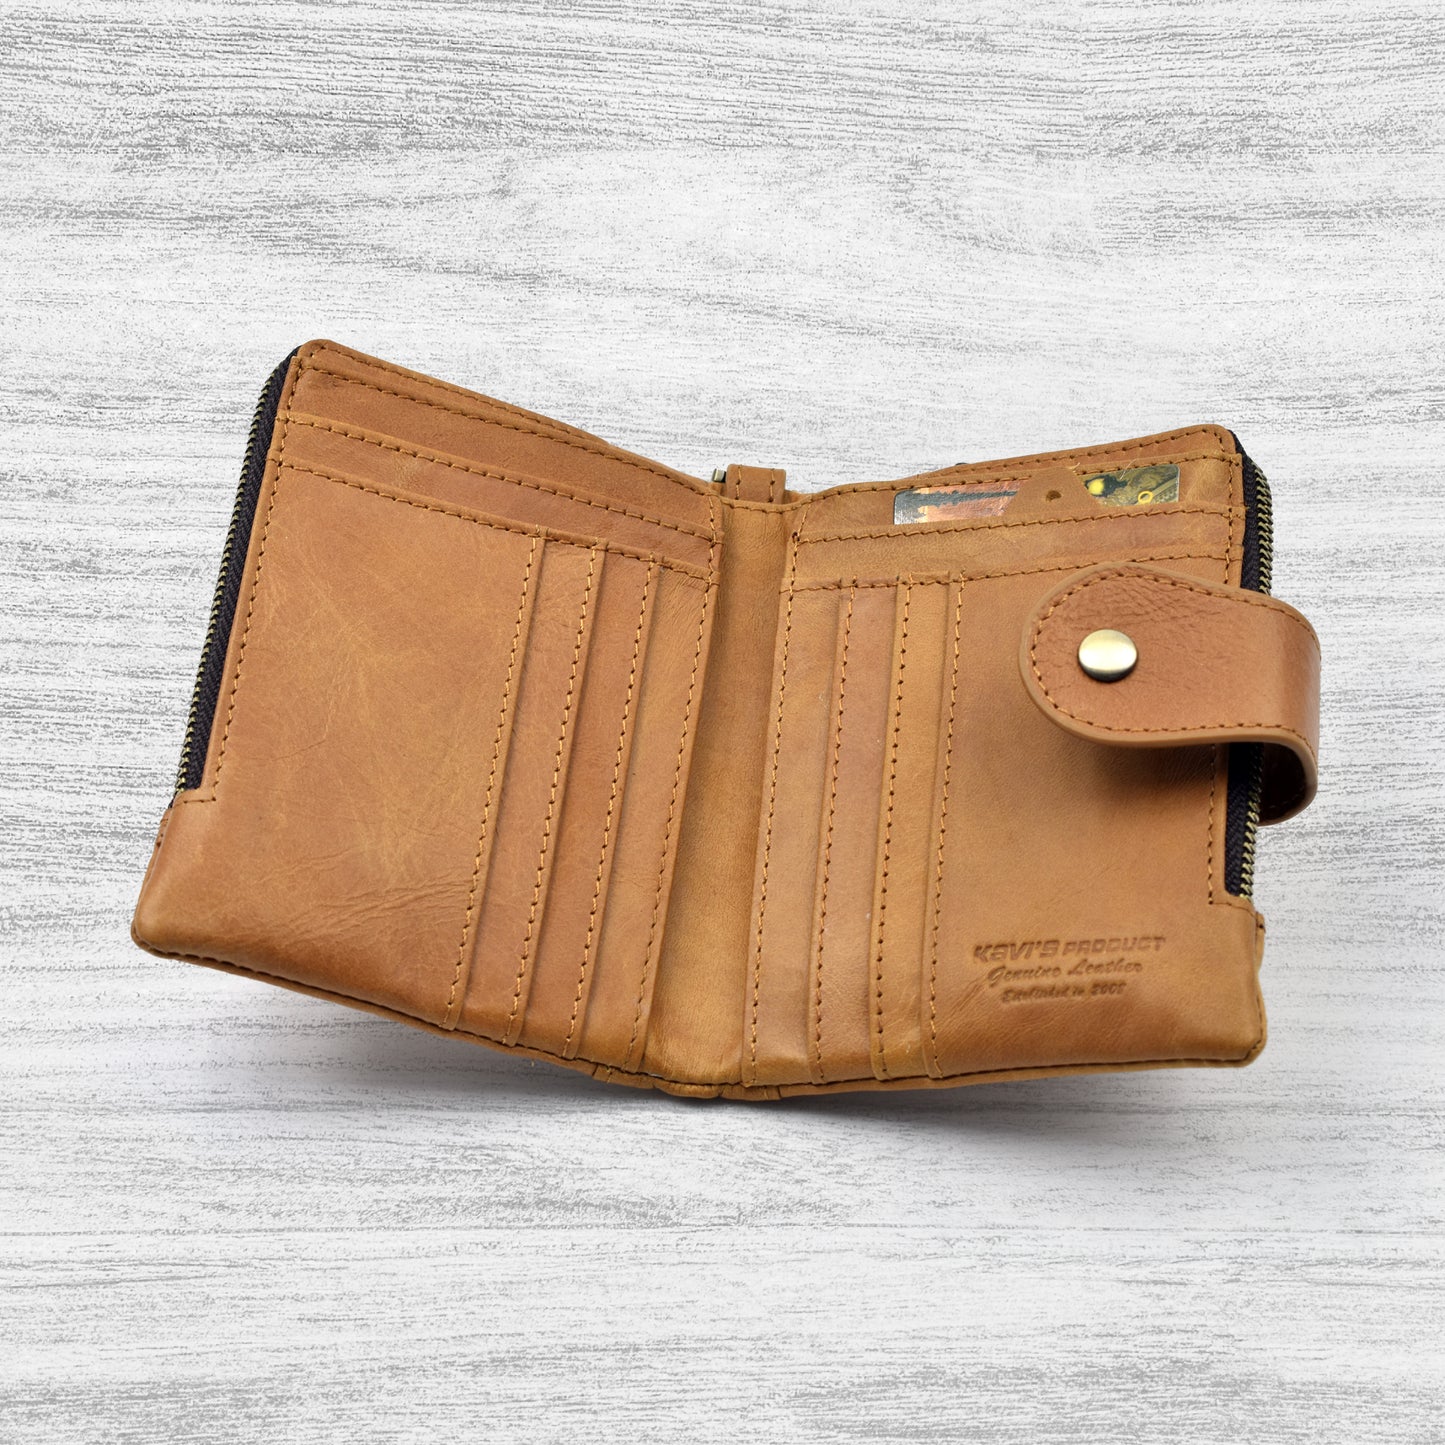 Original KAVI's Leather Wallet | Original Leather Imported From China | KAVIS 12